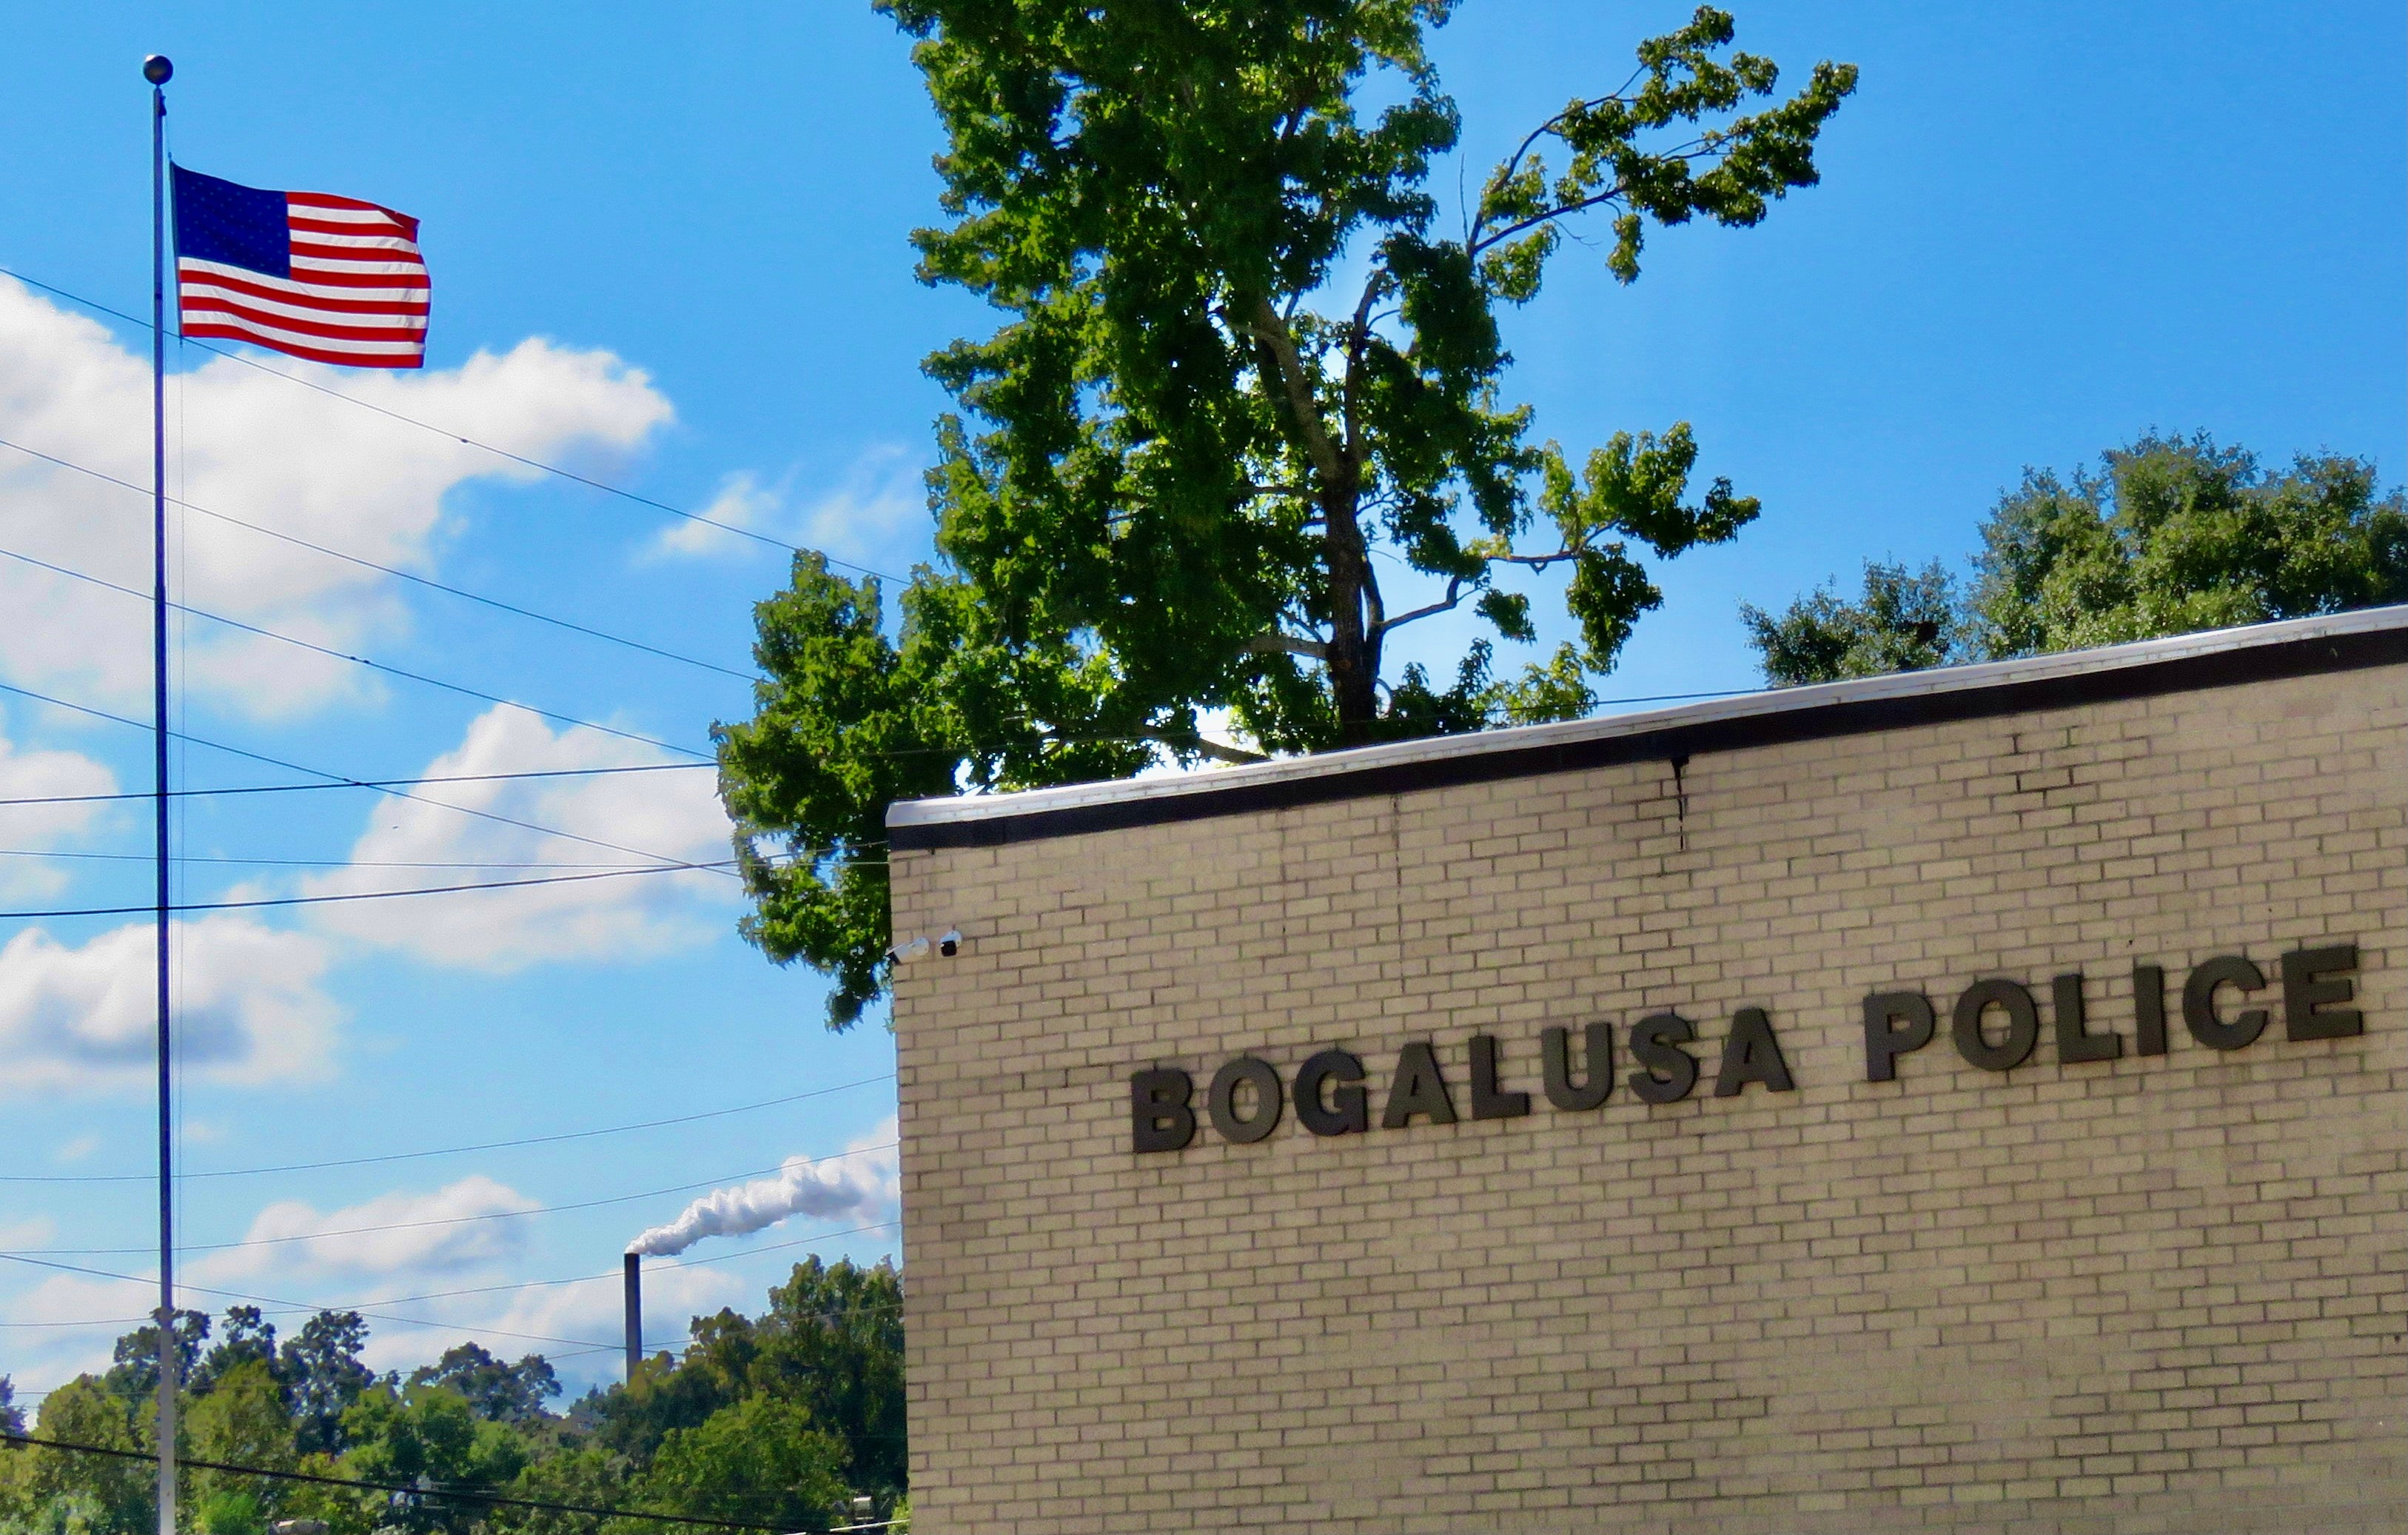 Bogalusa Police department